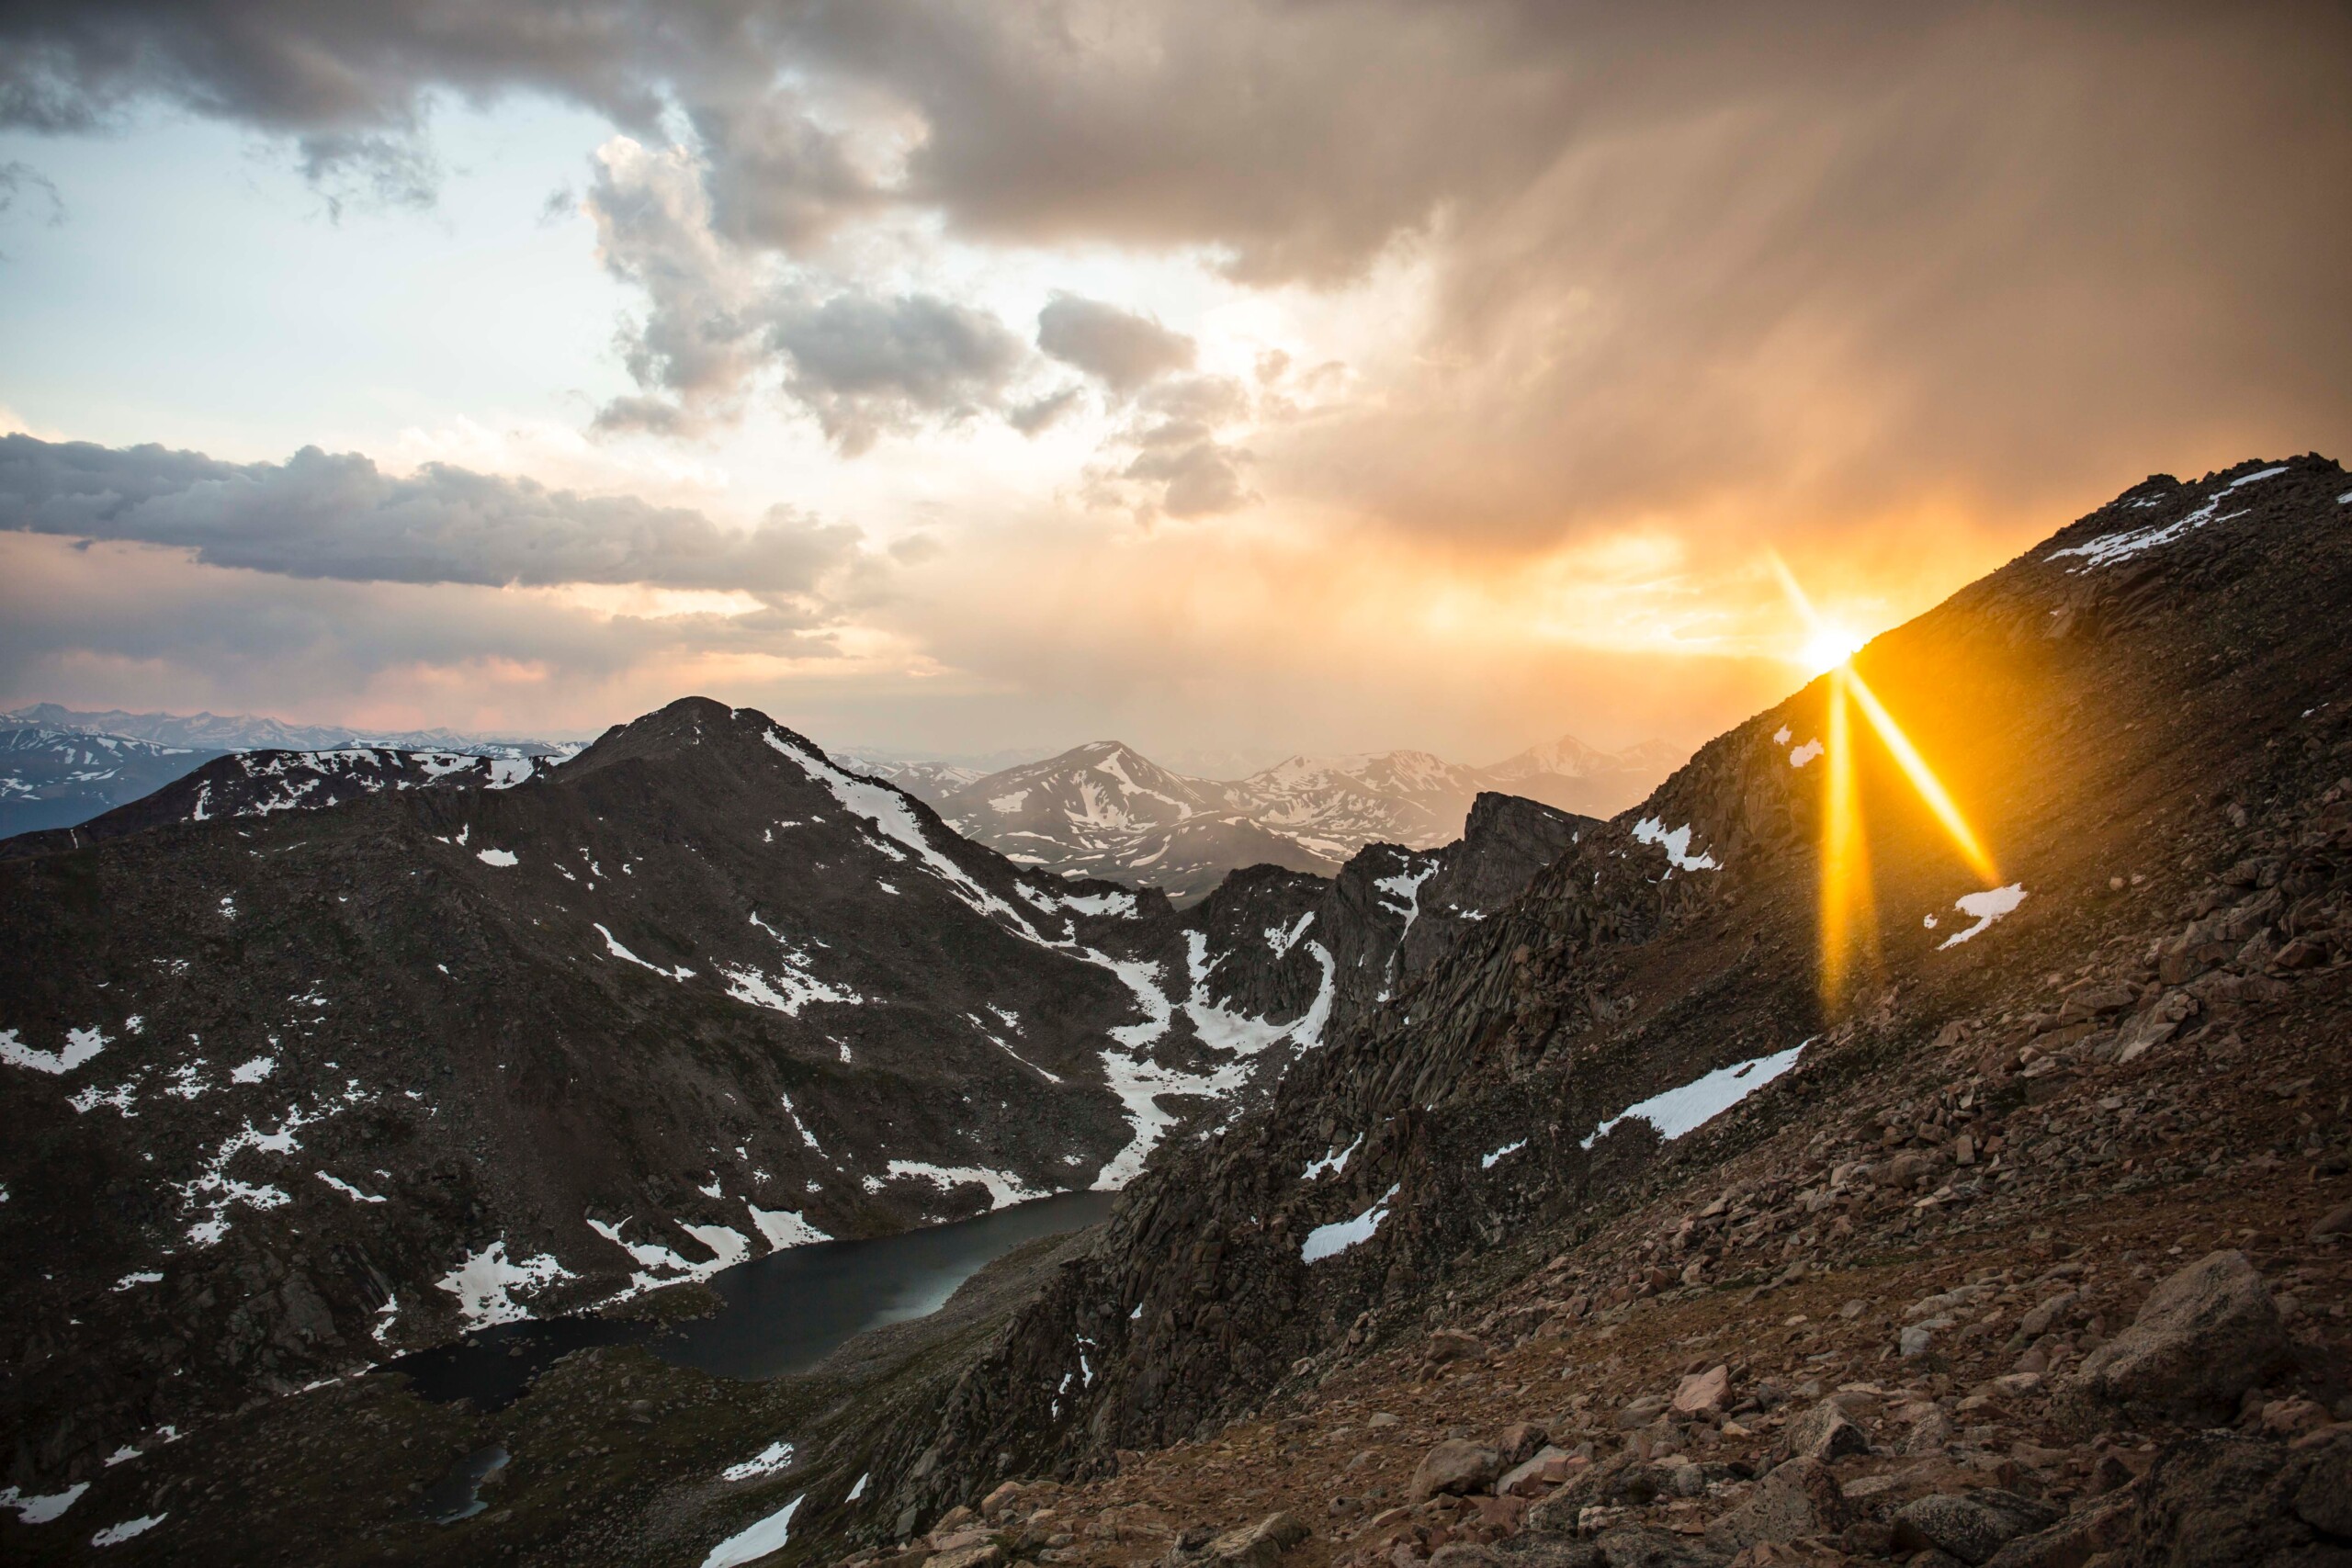 The peaks of mountains and a lake nestled among them with the sun glaring from just above the ridgeline